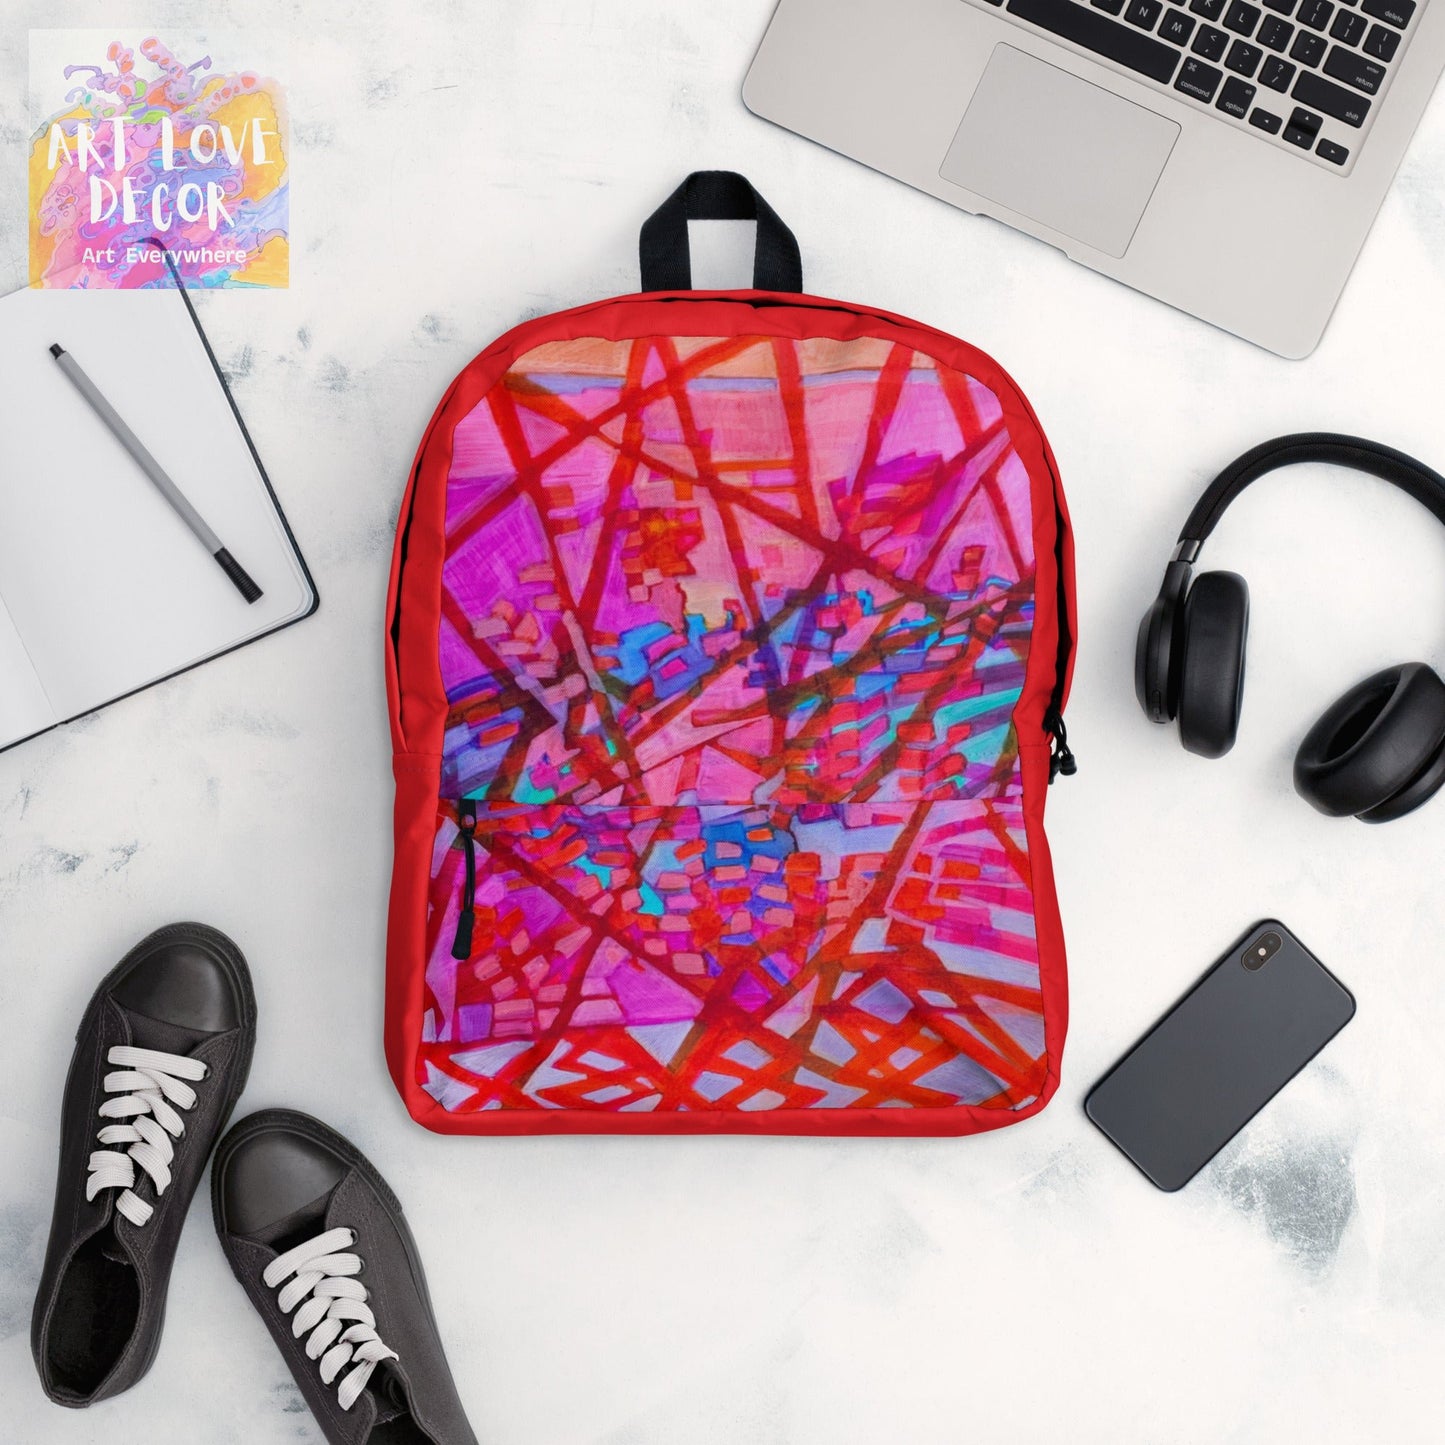 Separation Abstract Backpack - Art Love Decor